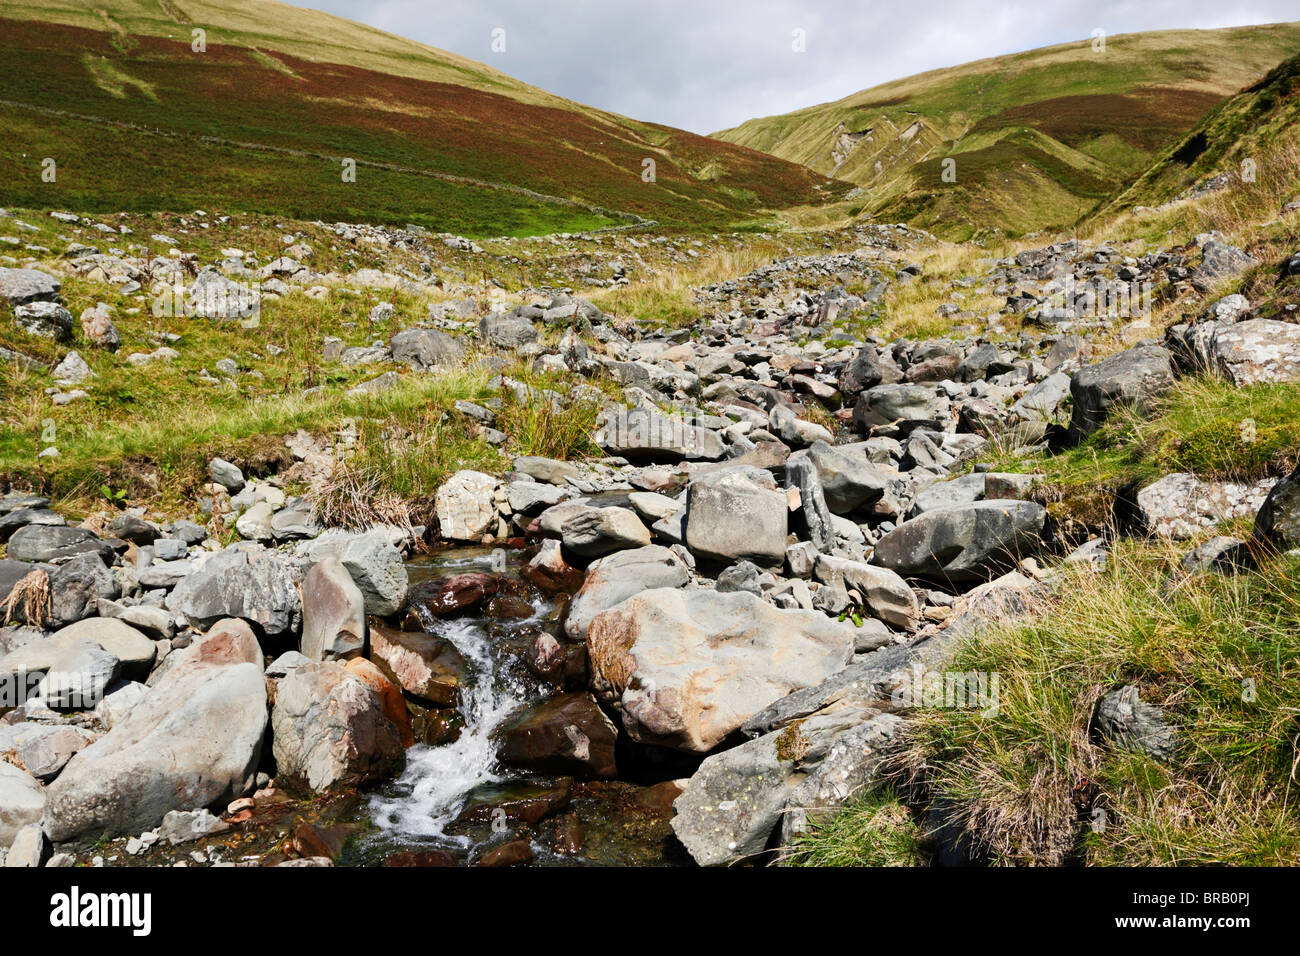 Carlingill Beck and Carlingill valley near Sedbergh in the Howgill Fells, Yorkshire Dales National Park, Cumbria, England. Stock Photo